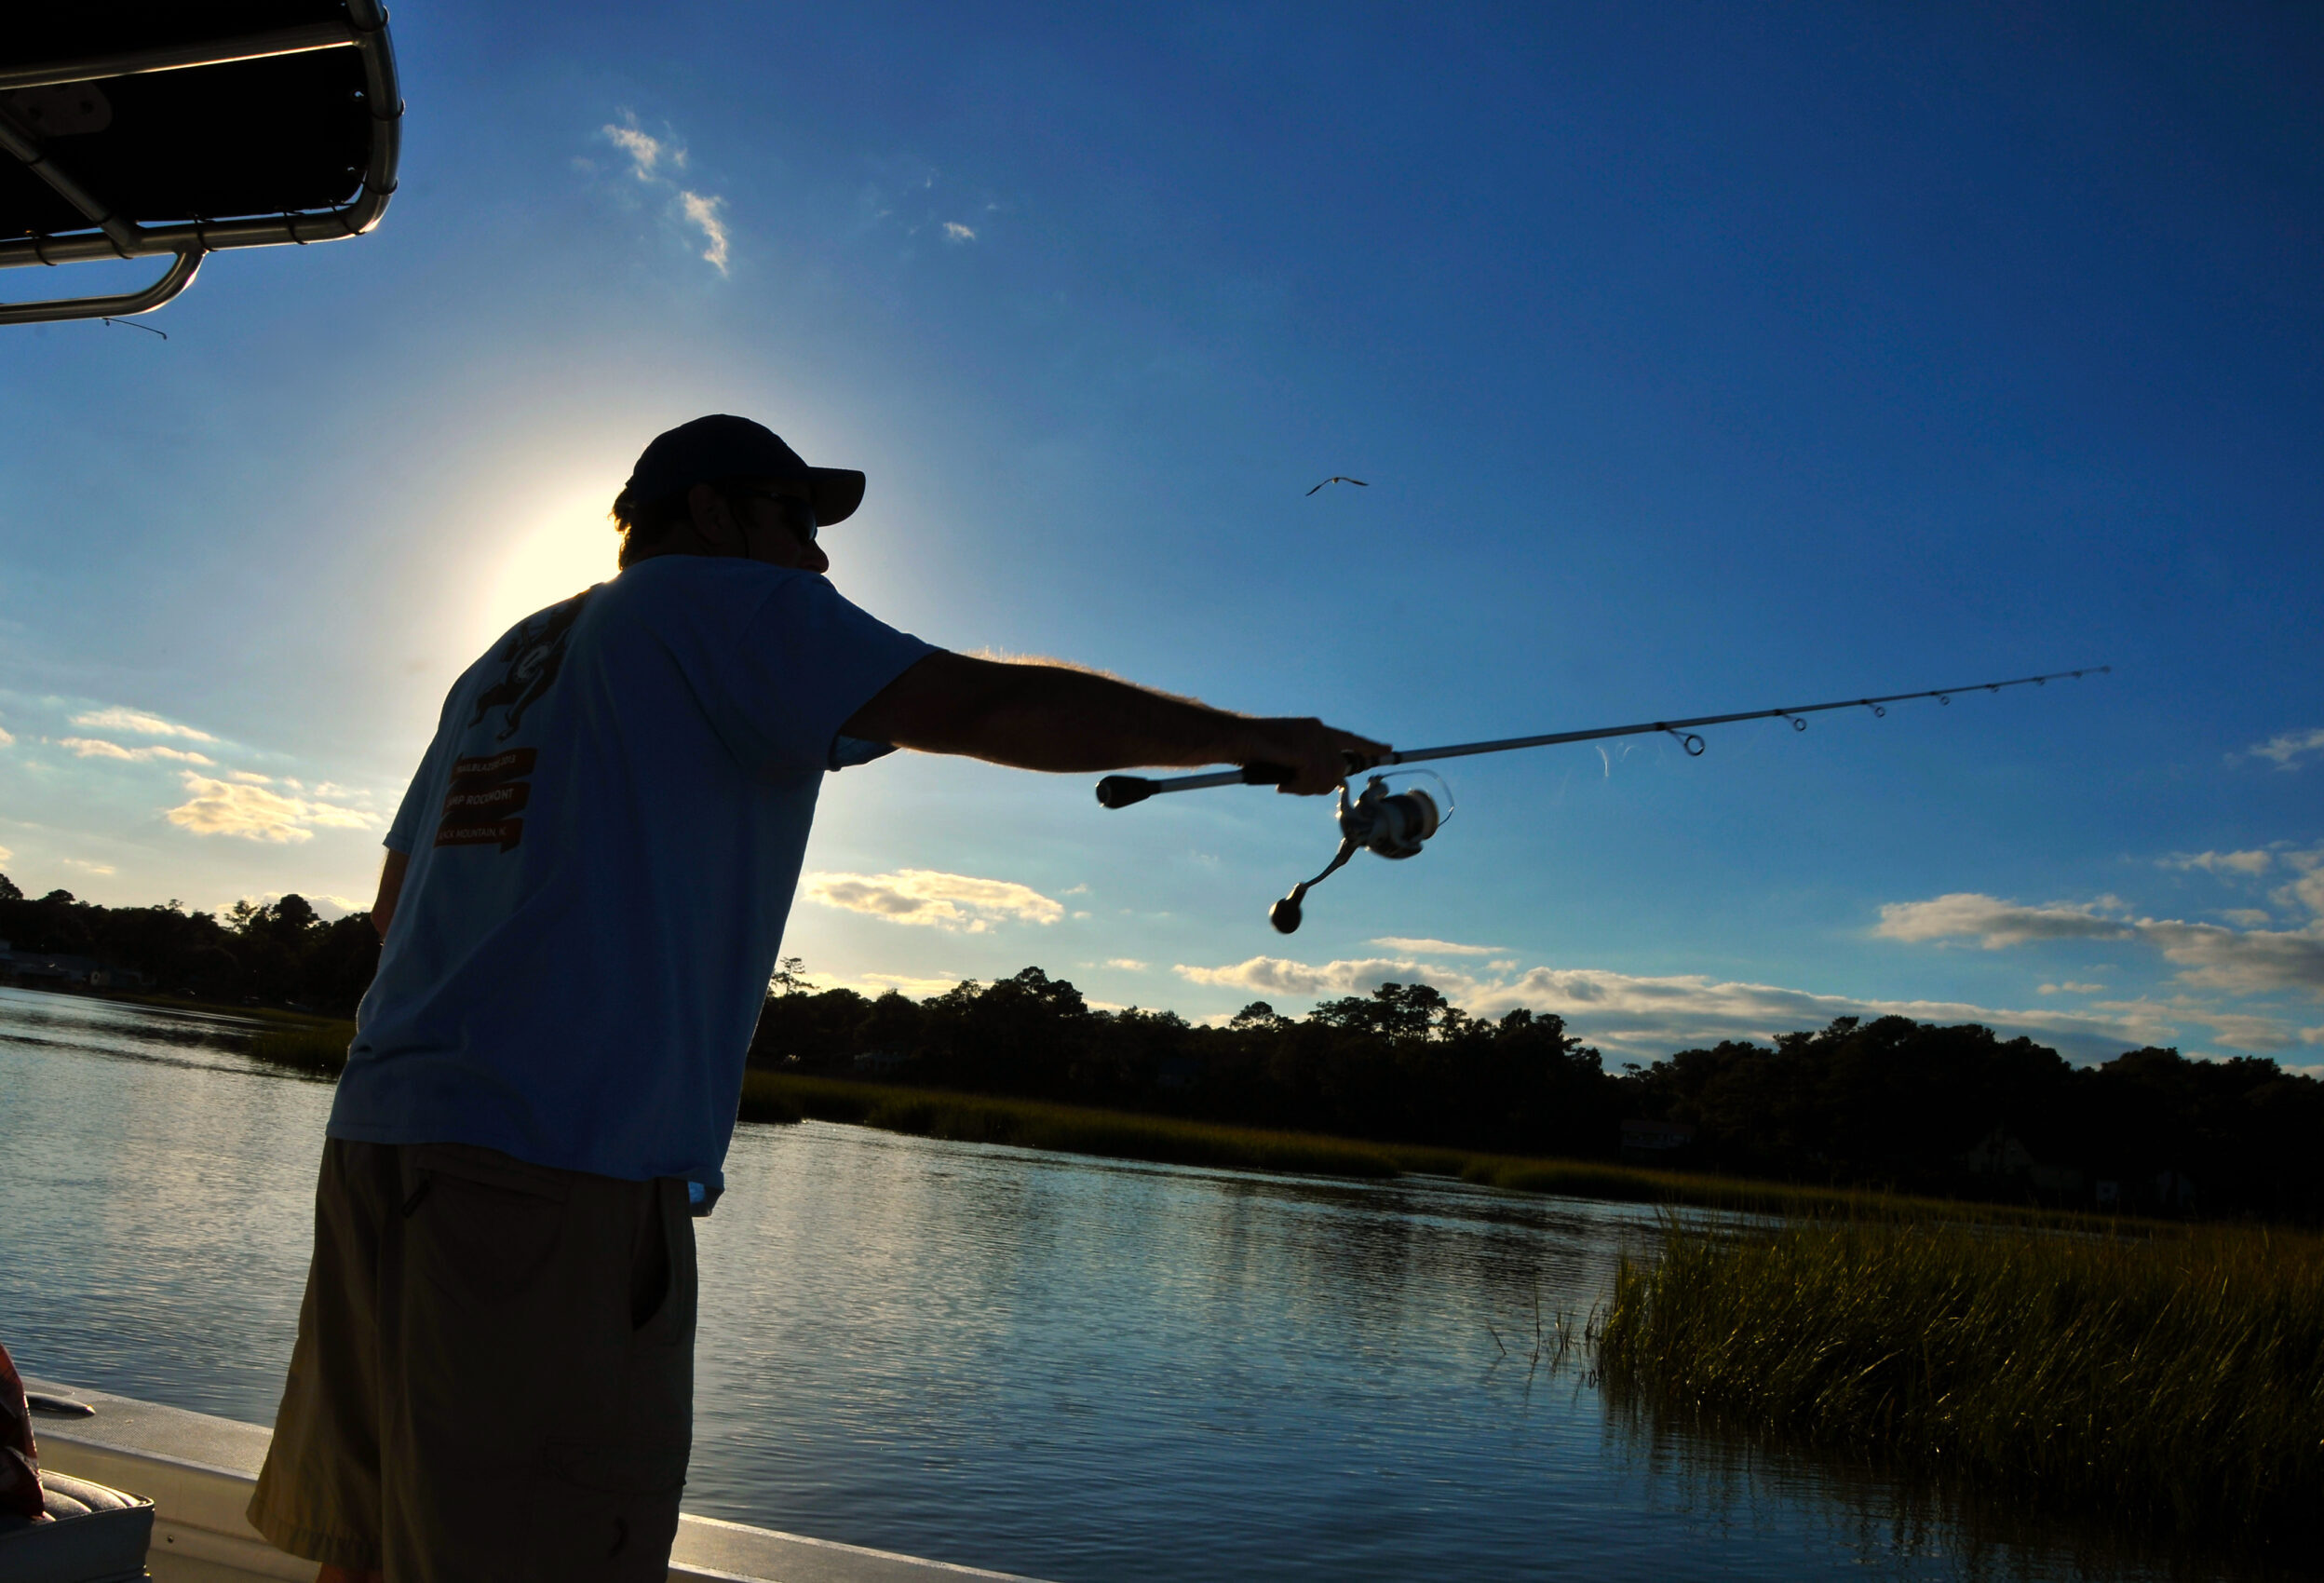 image: Fisherman casts up in the Shallotte River as the sun sets in early Fall.